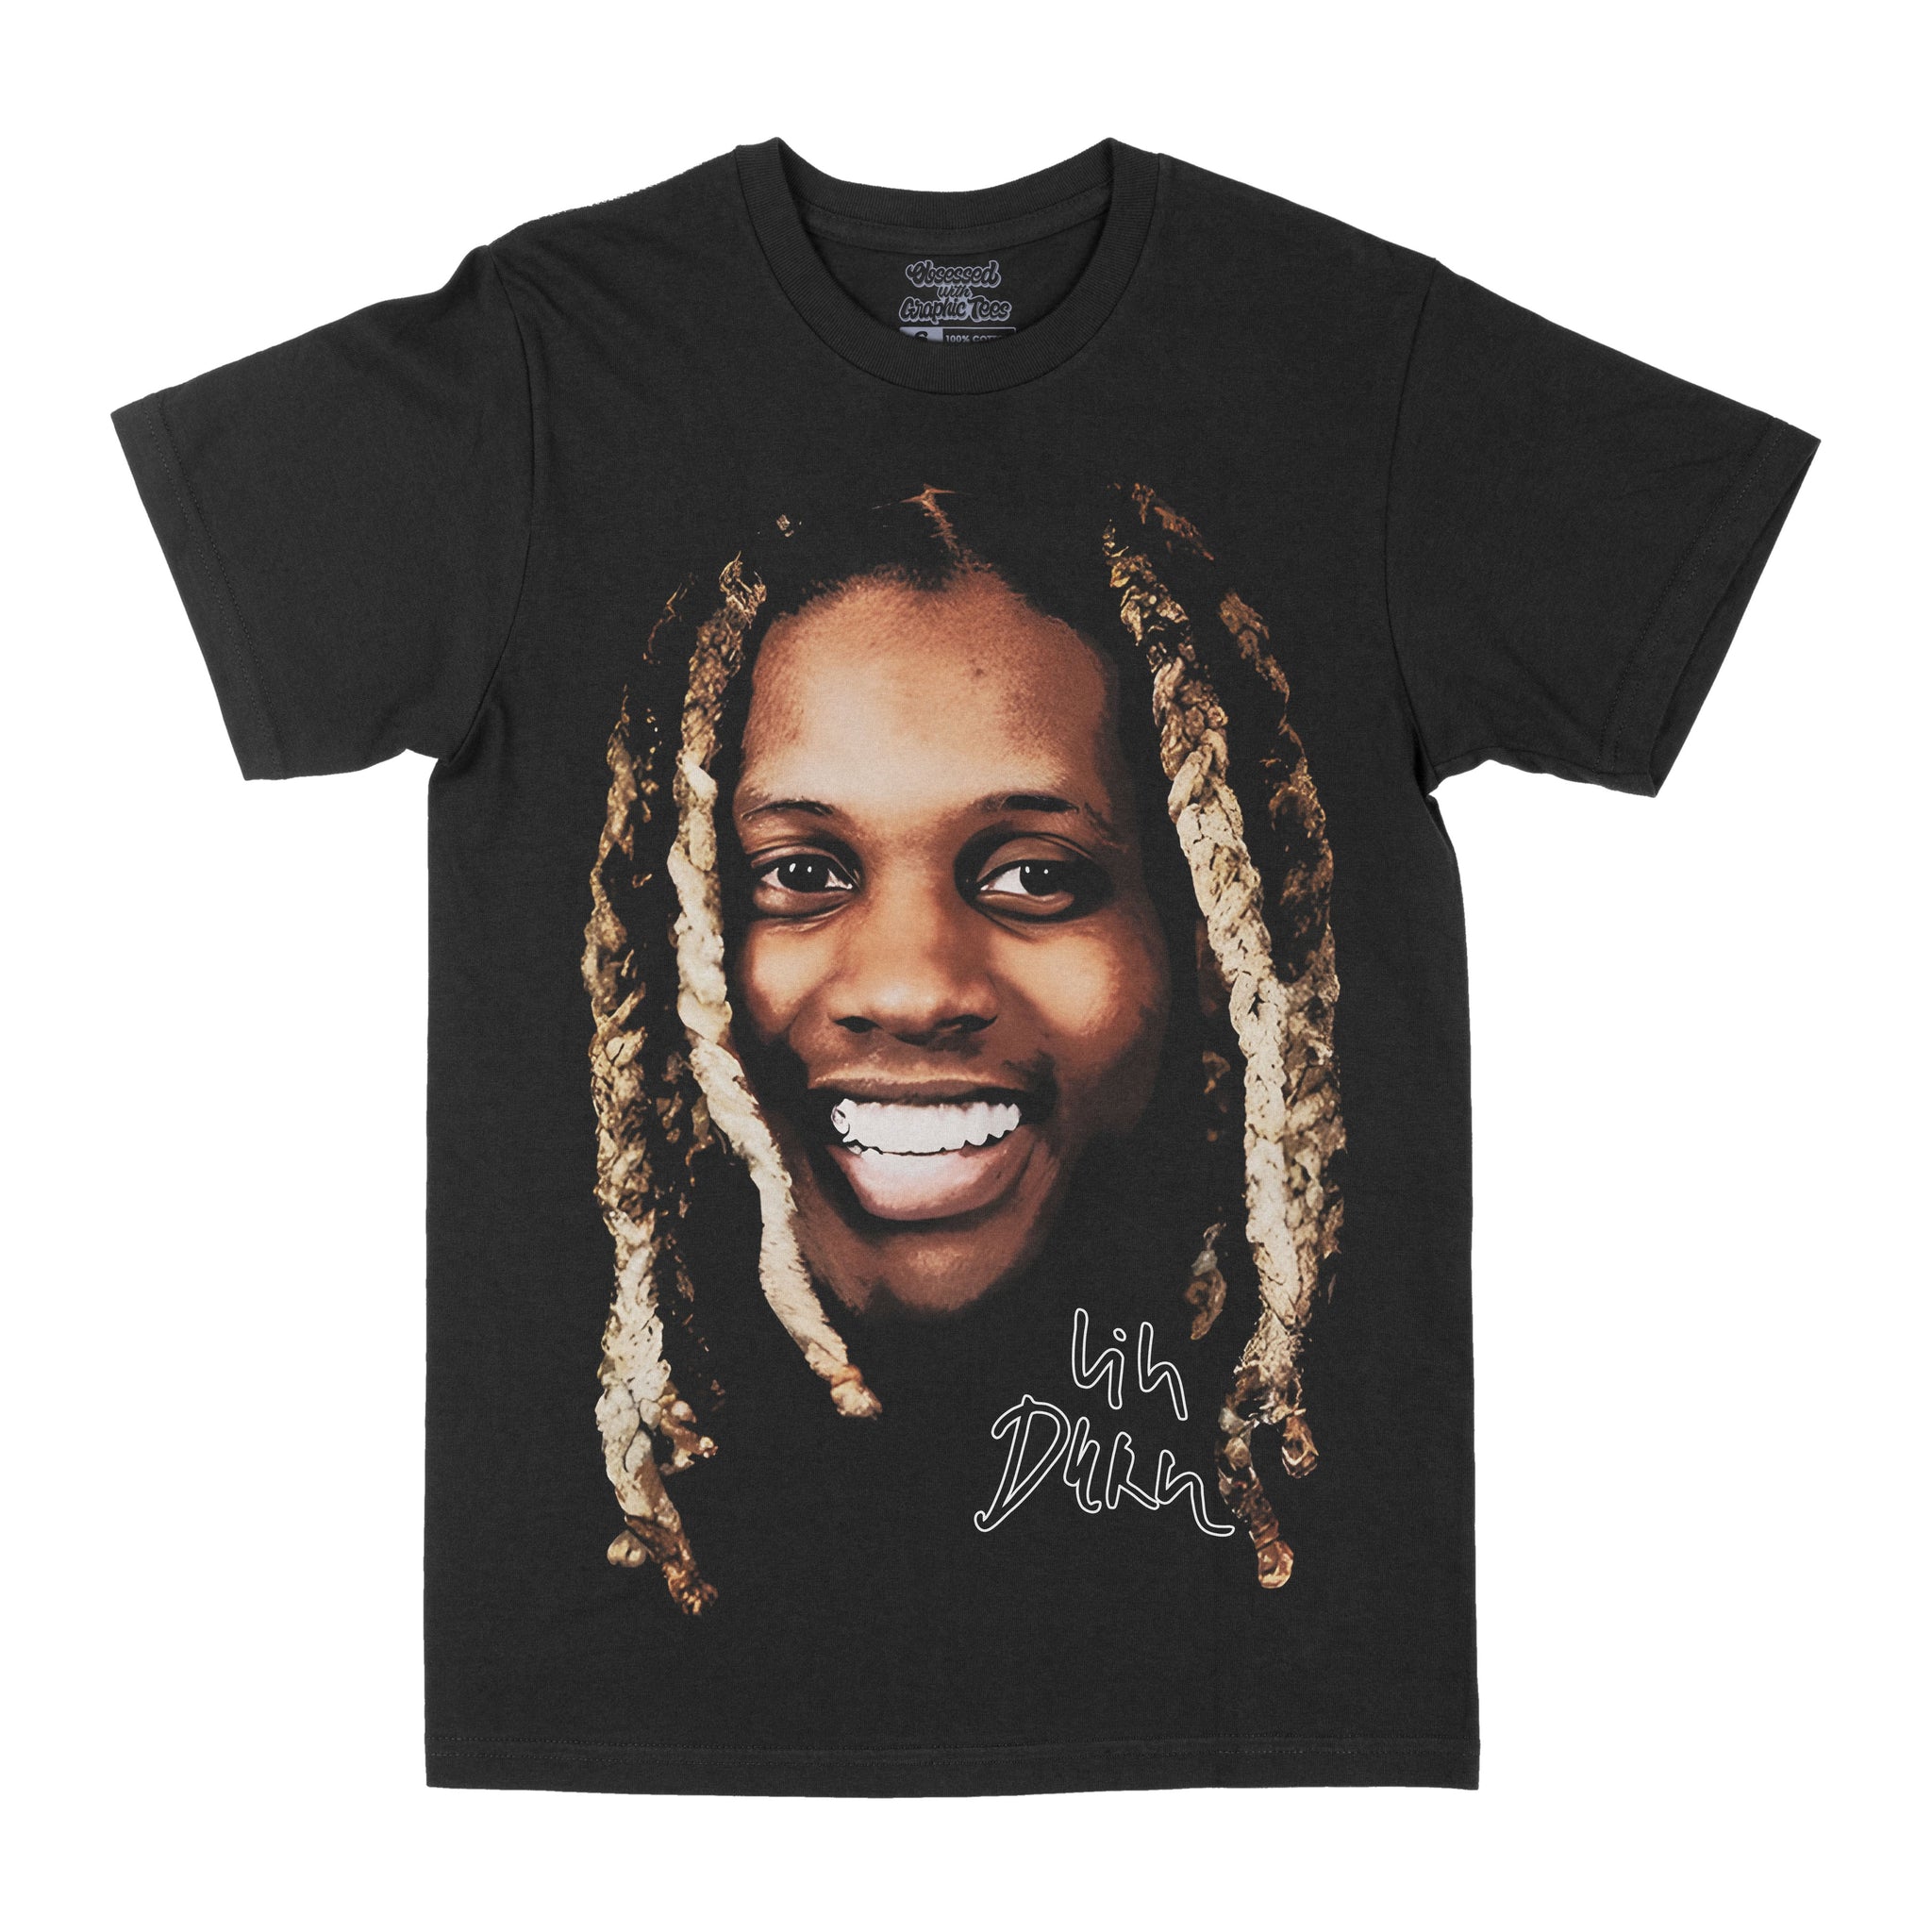 Lil Durk "Big Face" Graphic Tee